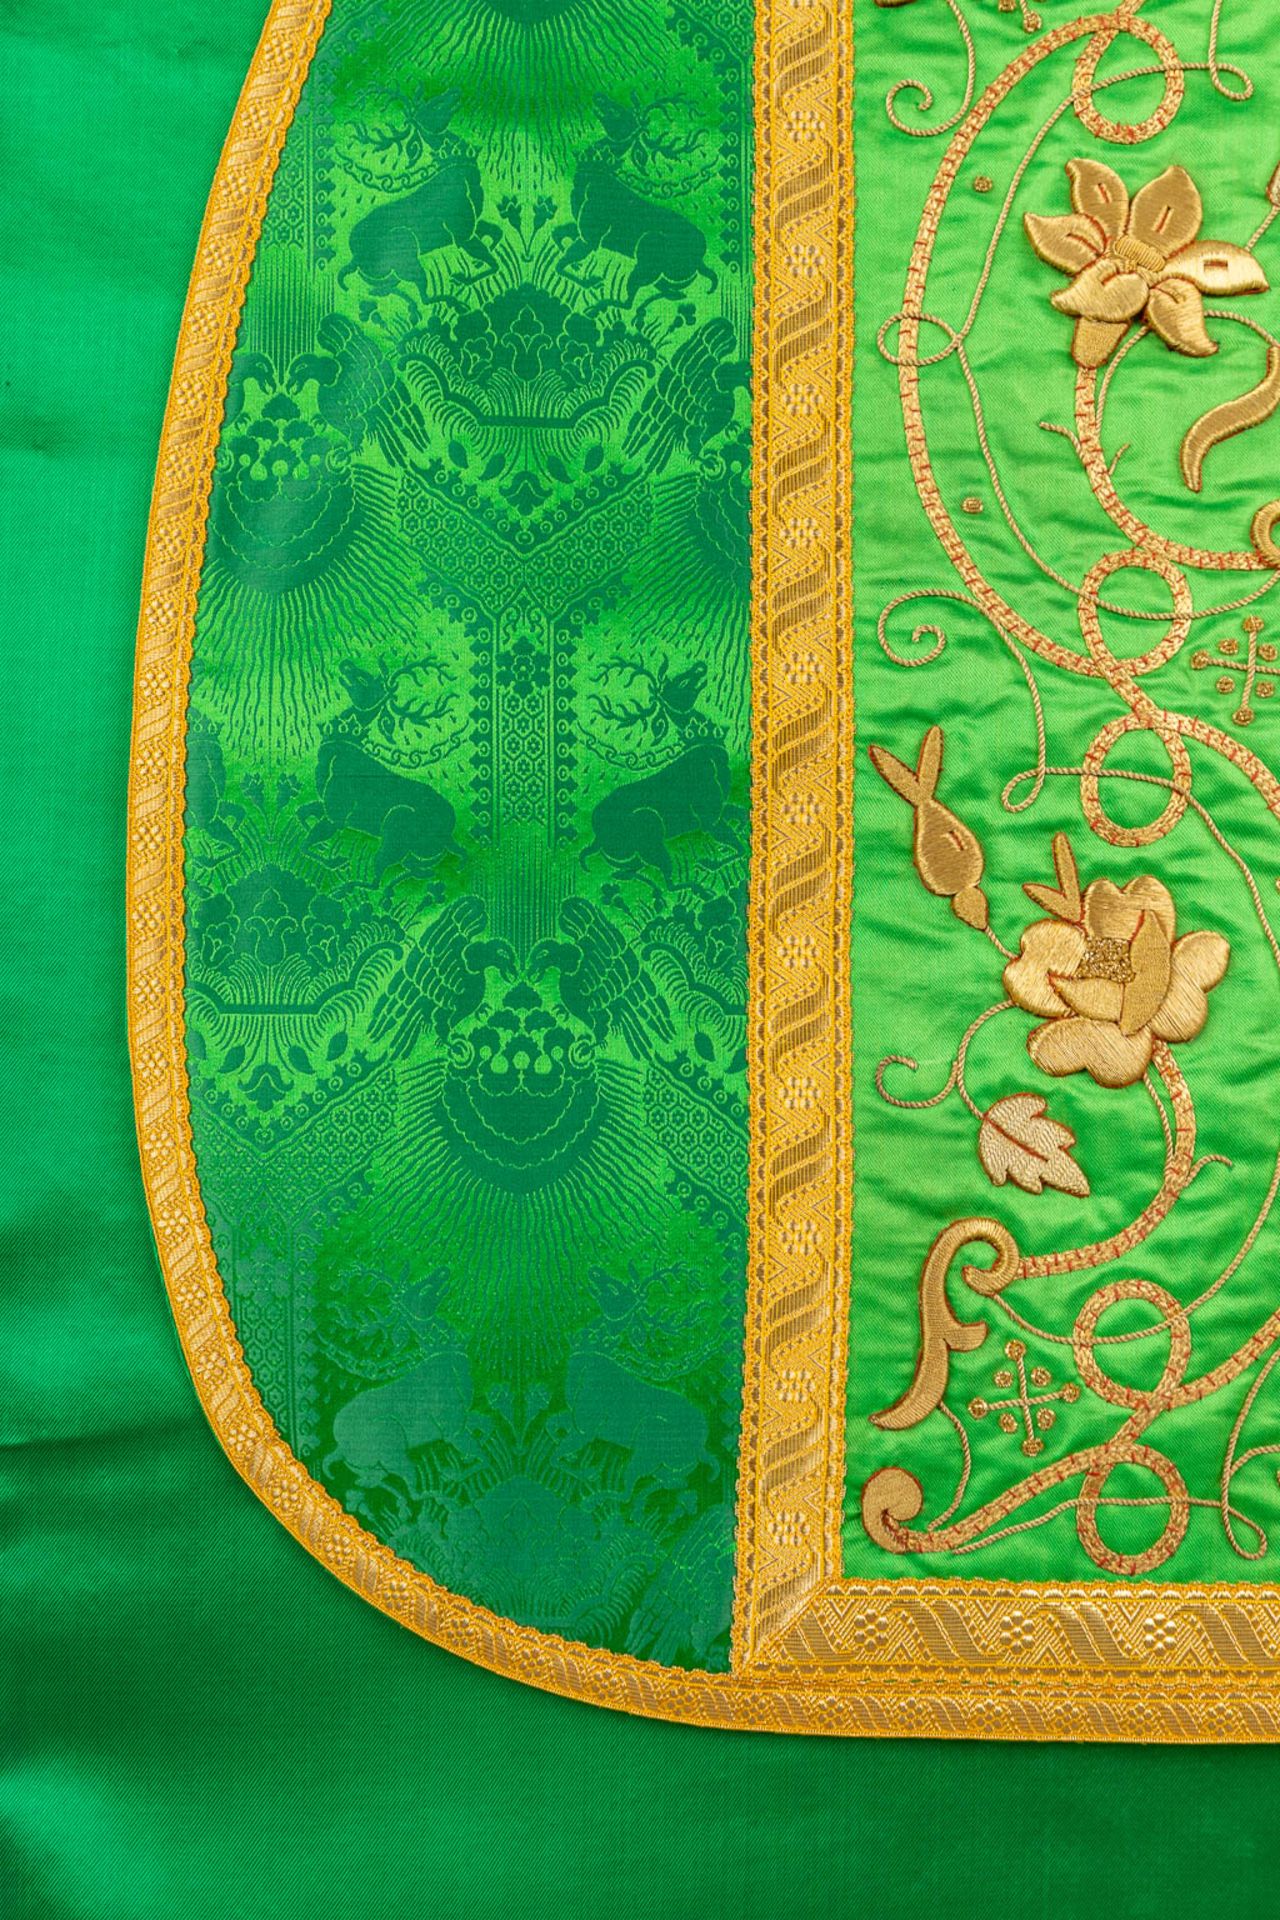 A set of 6 Roman Chasubles, maniple, Stola and Chalice veils - Image 7 of 37